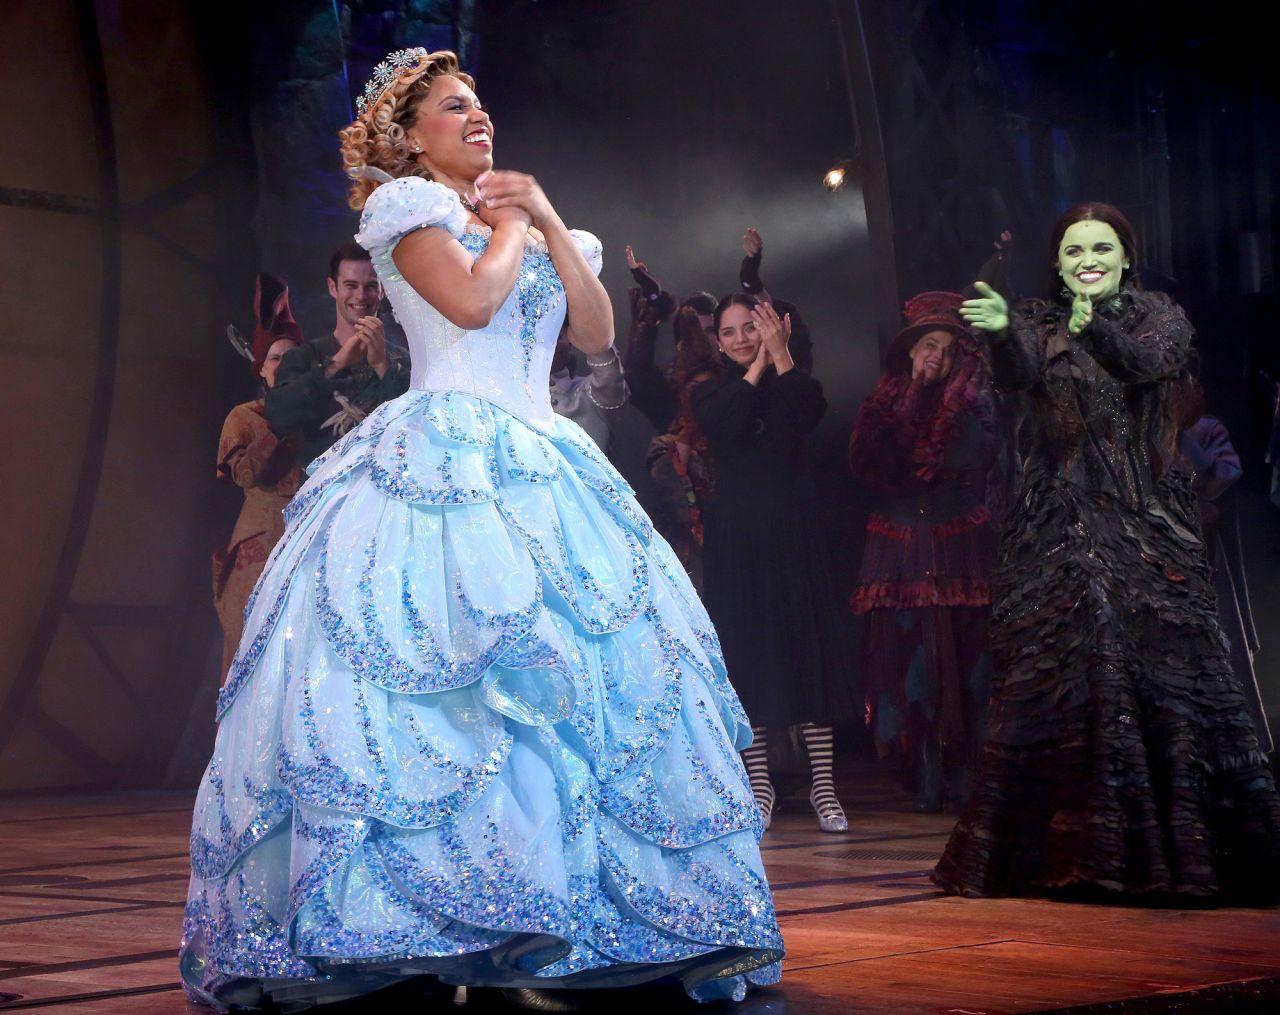 Brittney Johnson takes a bow after <a href="https://www.cnn.com/2022/02/15/entertainment/brittney-johnson-wicked-glinda-debut/index.html" target="_blank">she made Broadway history</a> on Monday, February 14. Johnson is the first actress of color to play the full-time role of Glinda, the lead character in the musical "Wicked."